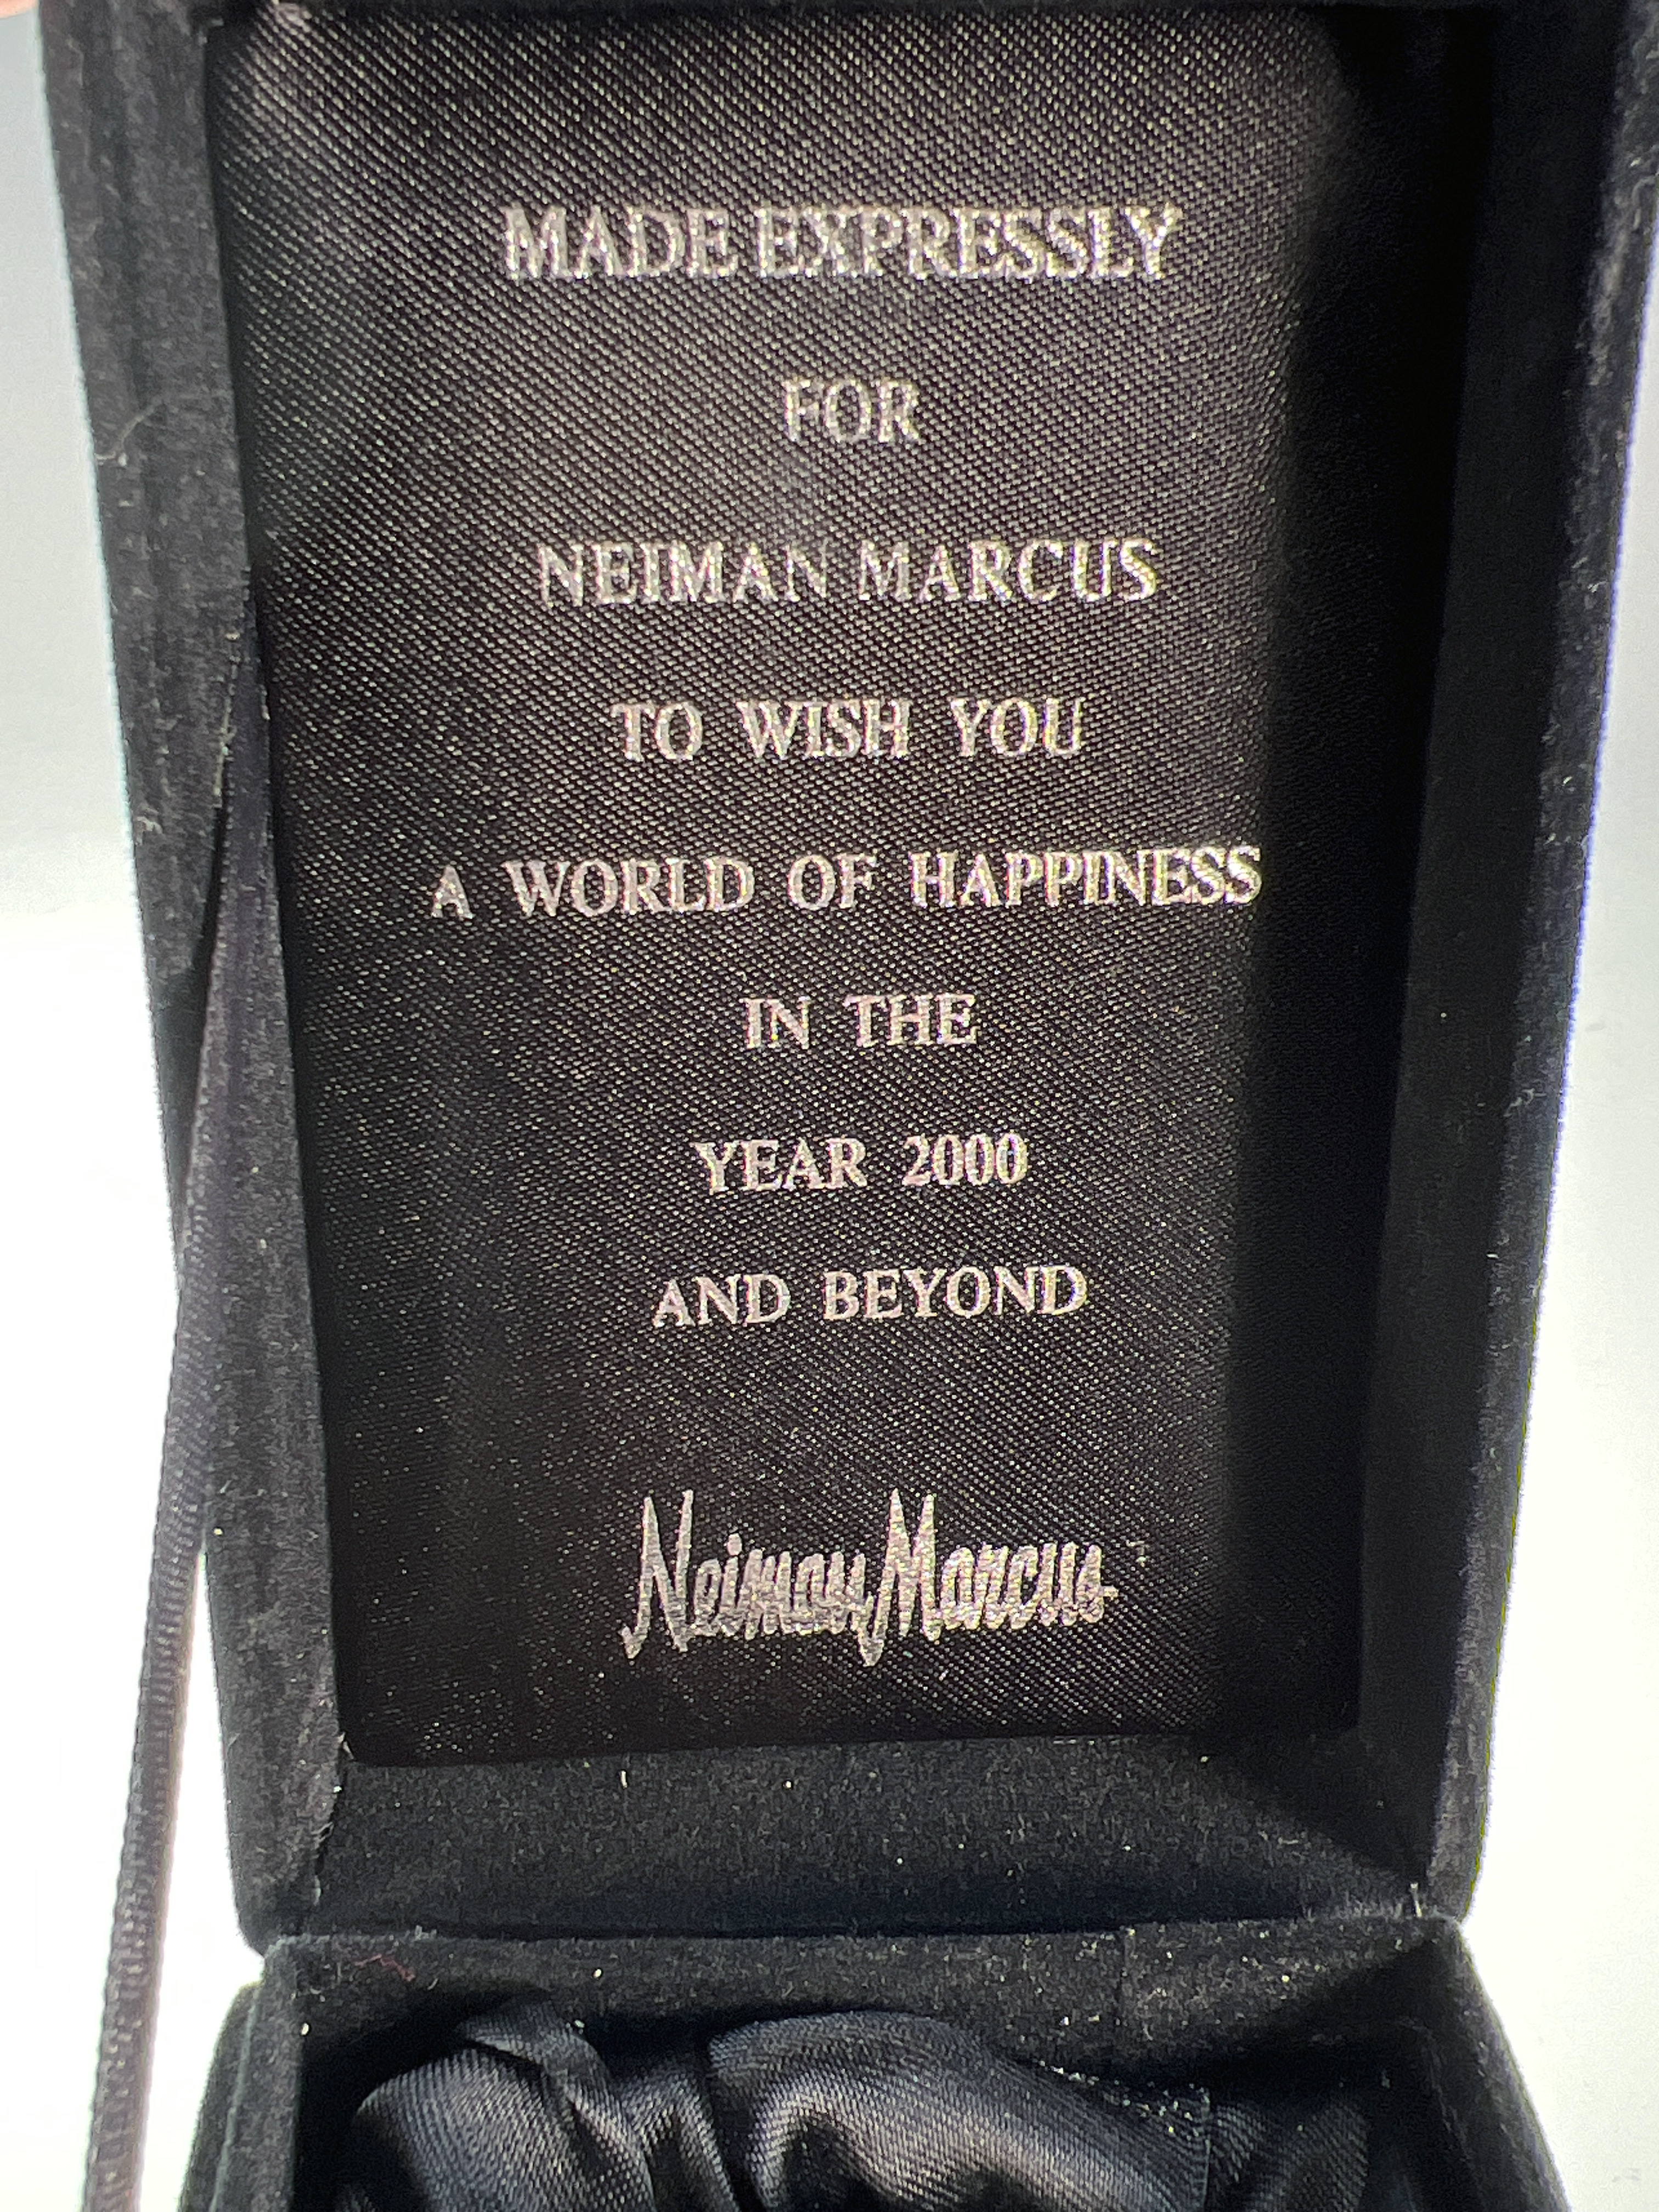 Neiman Marcus 2000 World Of Happiness Stopper In Box image 3